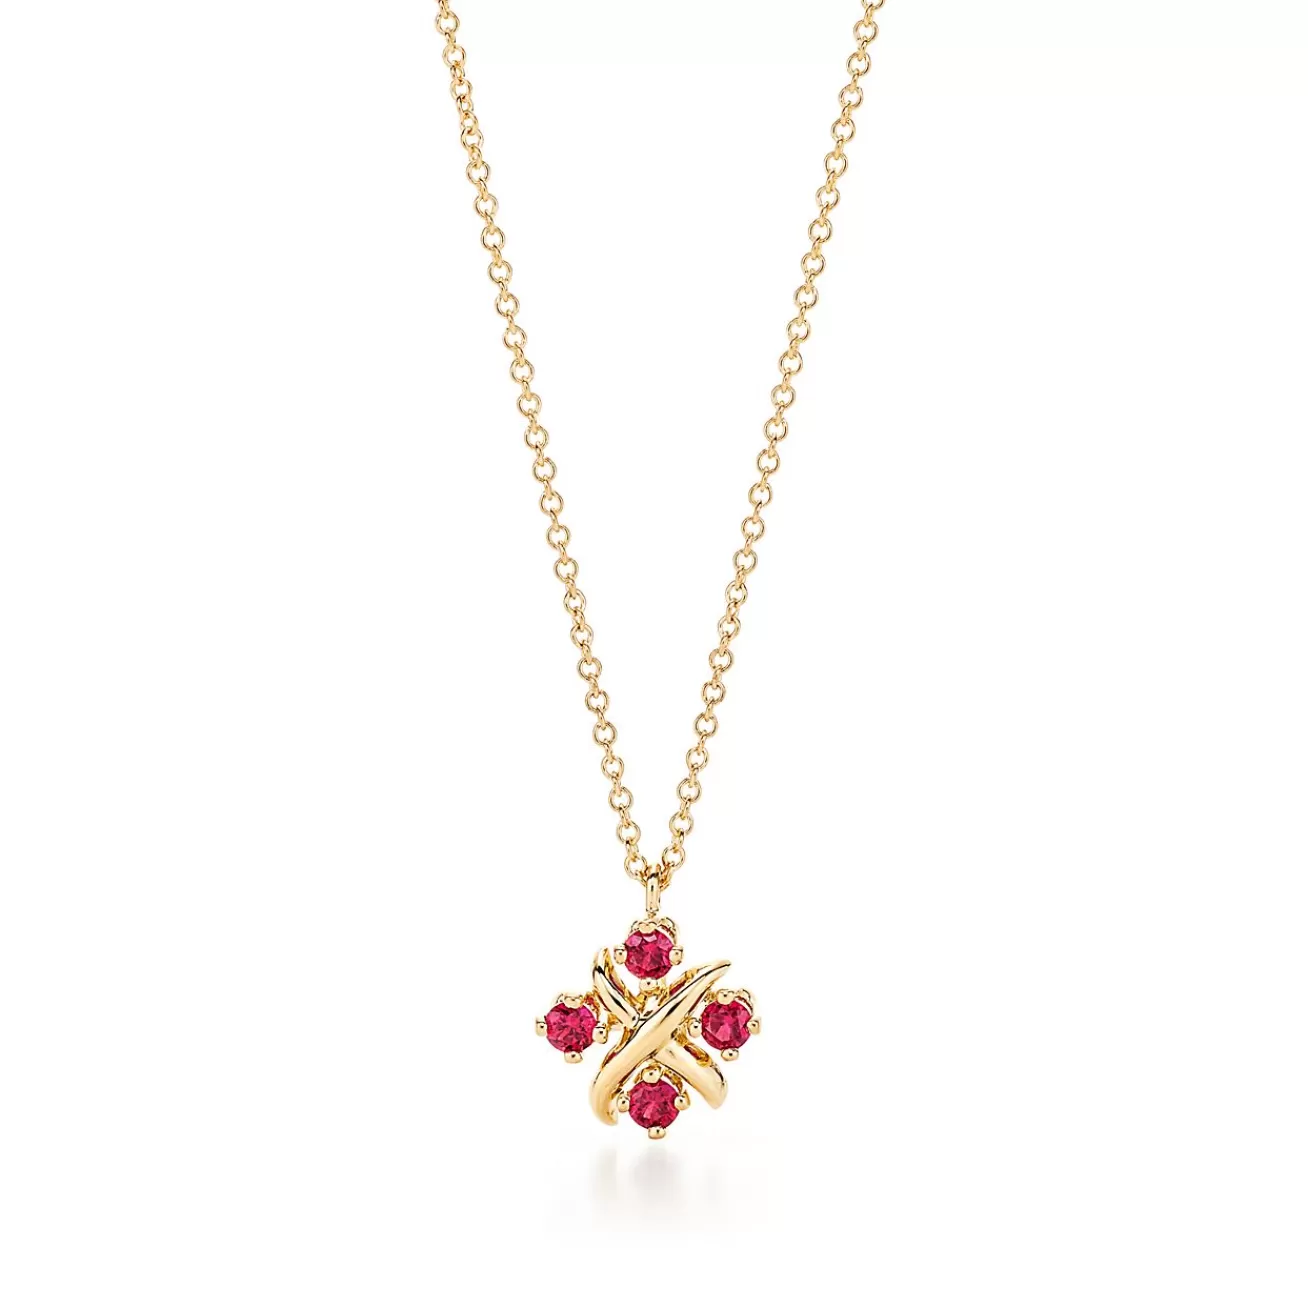 Tiffany & Co. Schlumberger® Lynn pendant in 18k gold with rubies. | ^ Necklaces & Pendants | Gold Jewelry